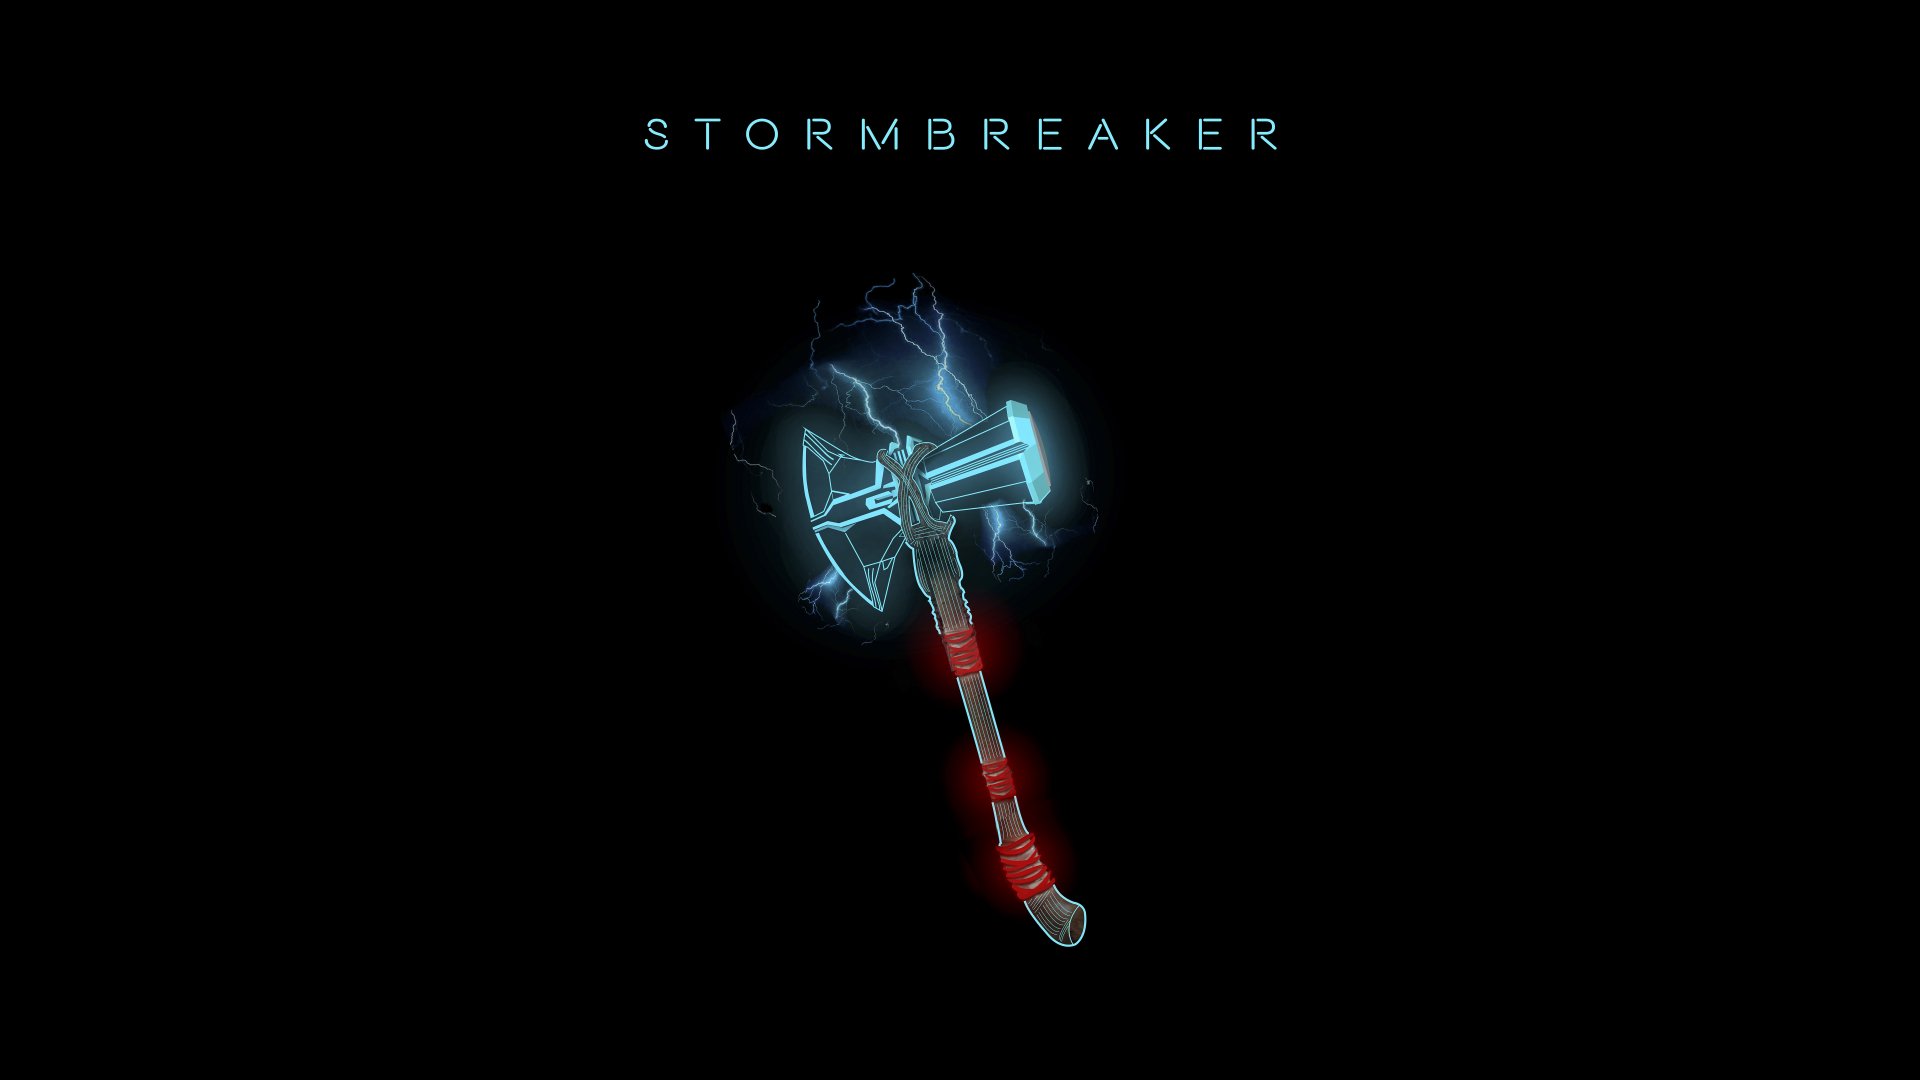 Stormbreaker HD Wallpapers and Backgrounds.